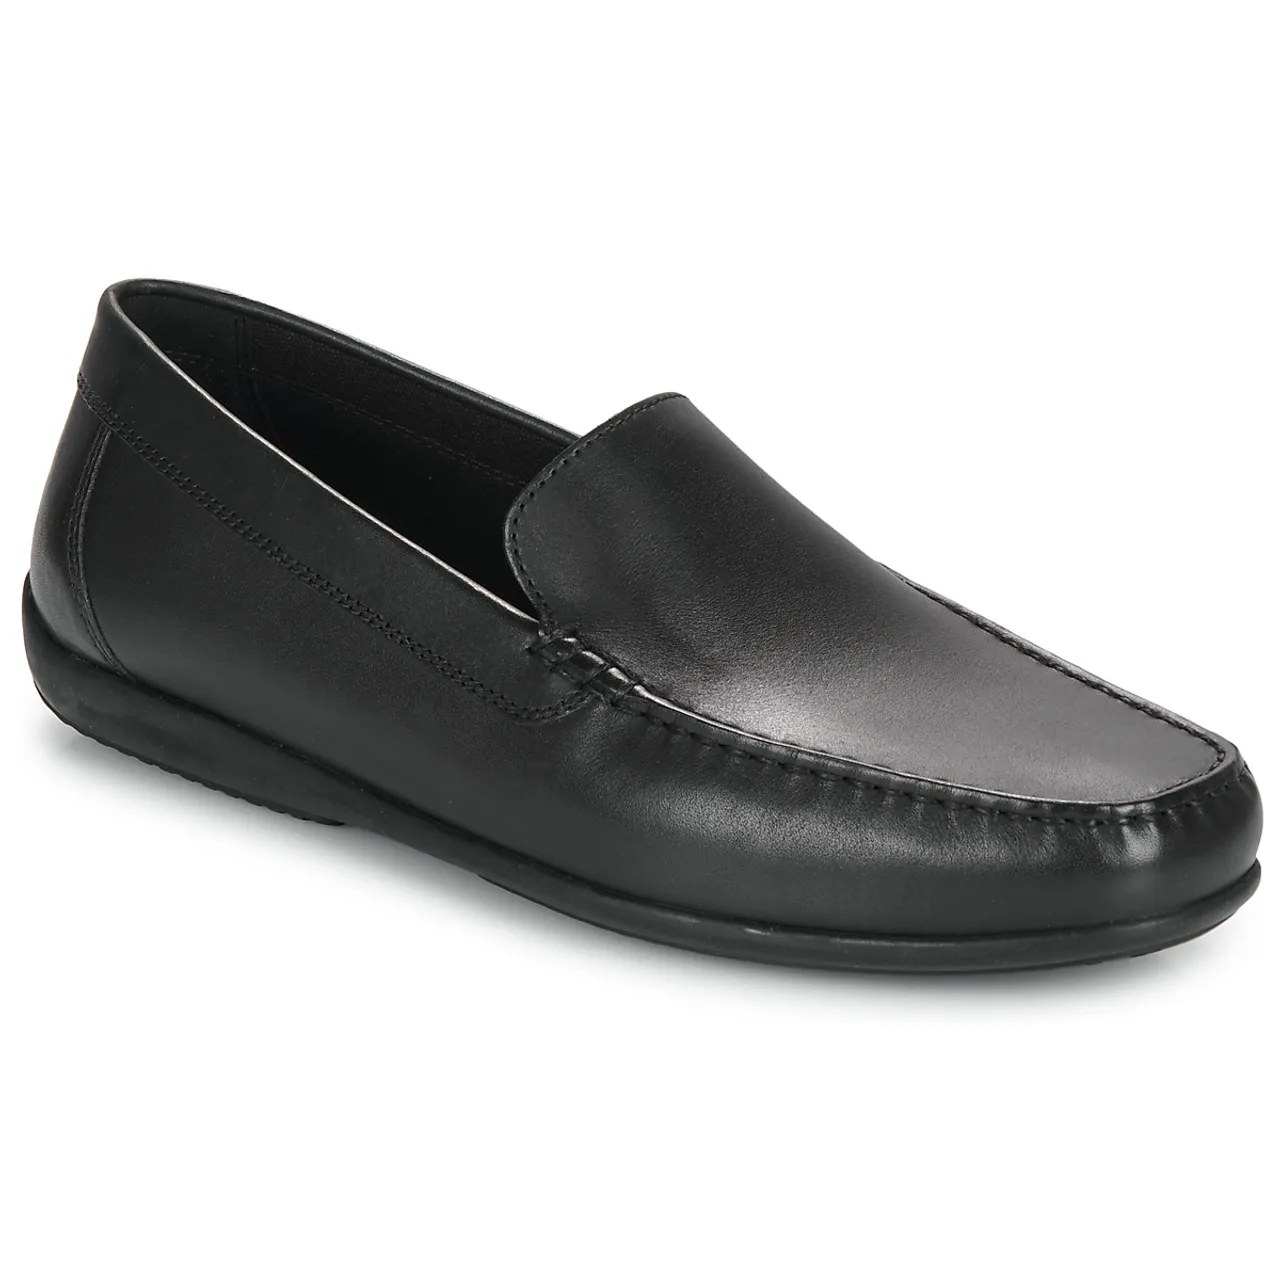 Geox  U ASCANIO  men's Loafers / Casual Shoes in Black